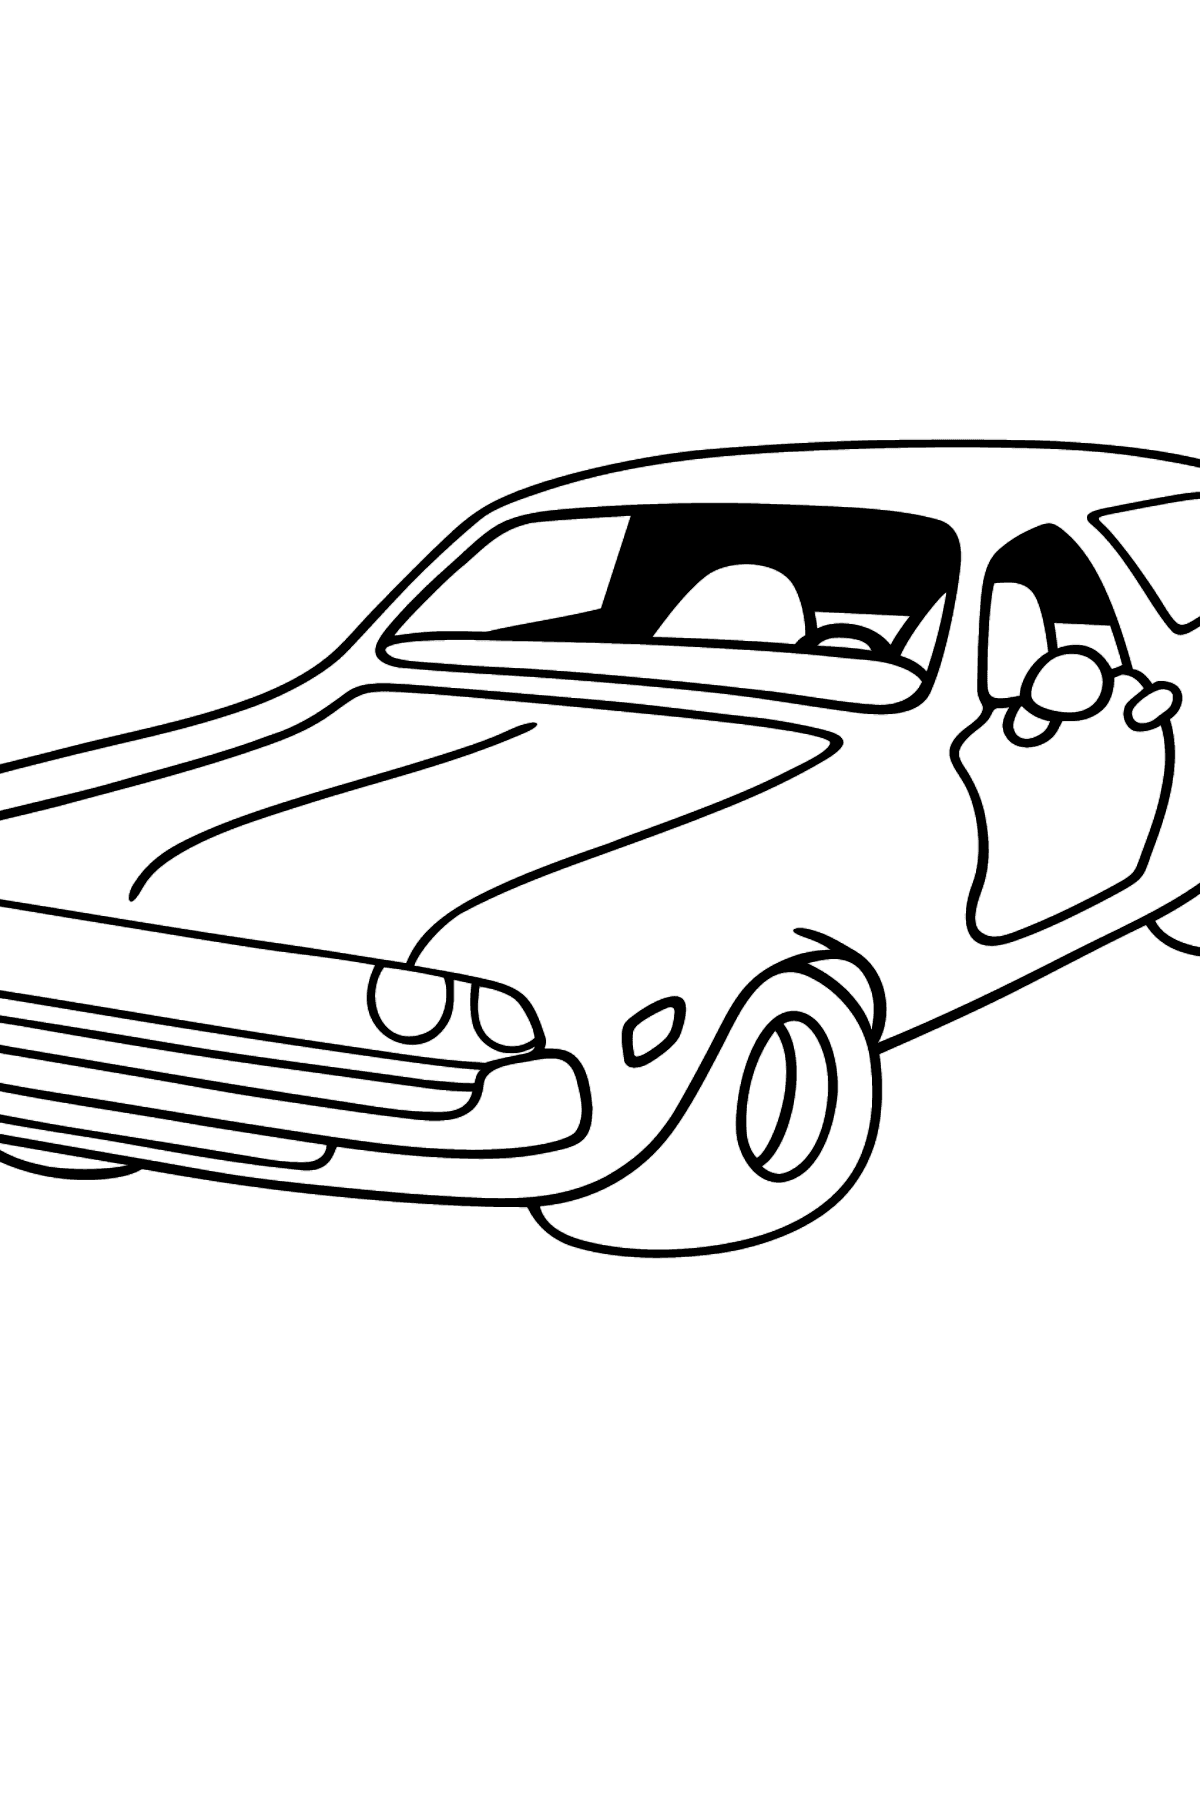 Chevrolet gray car coloring page - Coloring Pages for Kids